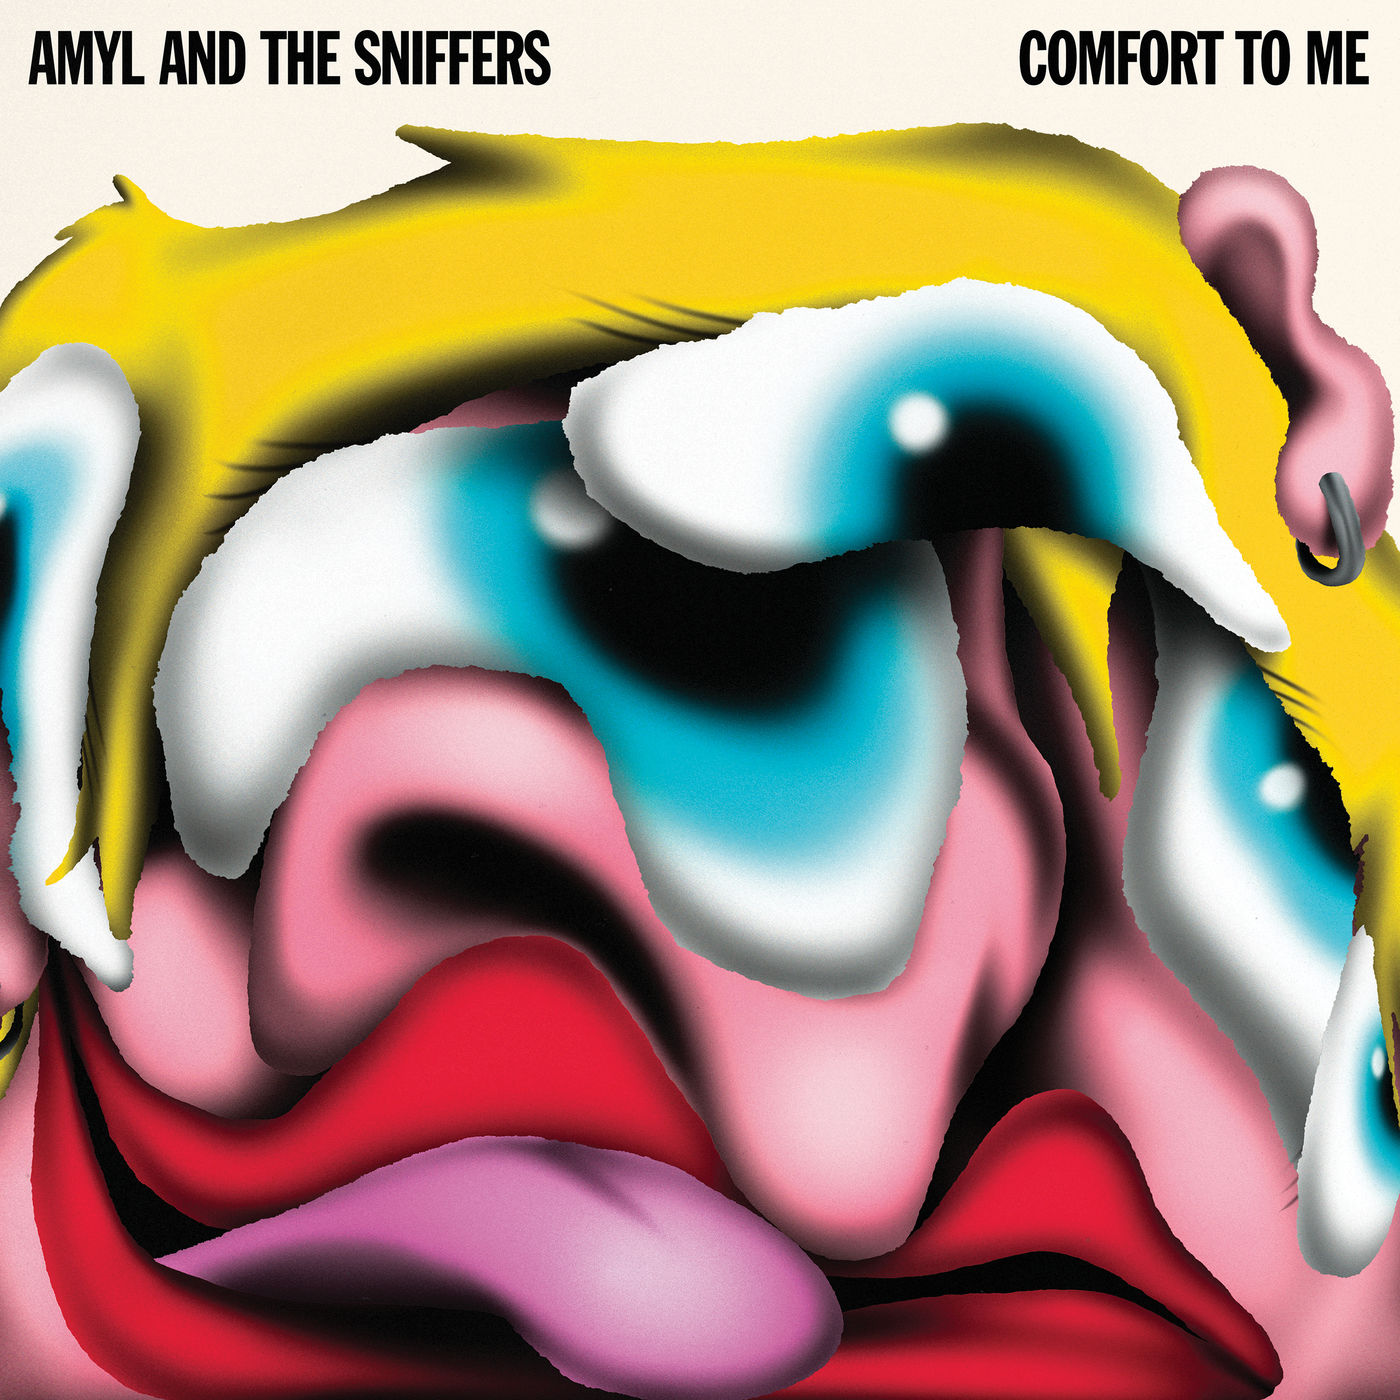 Amyl and The Sniffers – Comfort To Me (2021) [FLAC 24bit/96kHz]